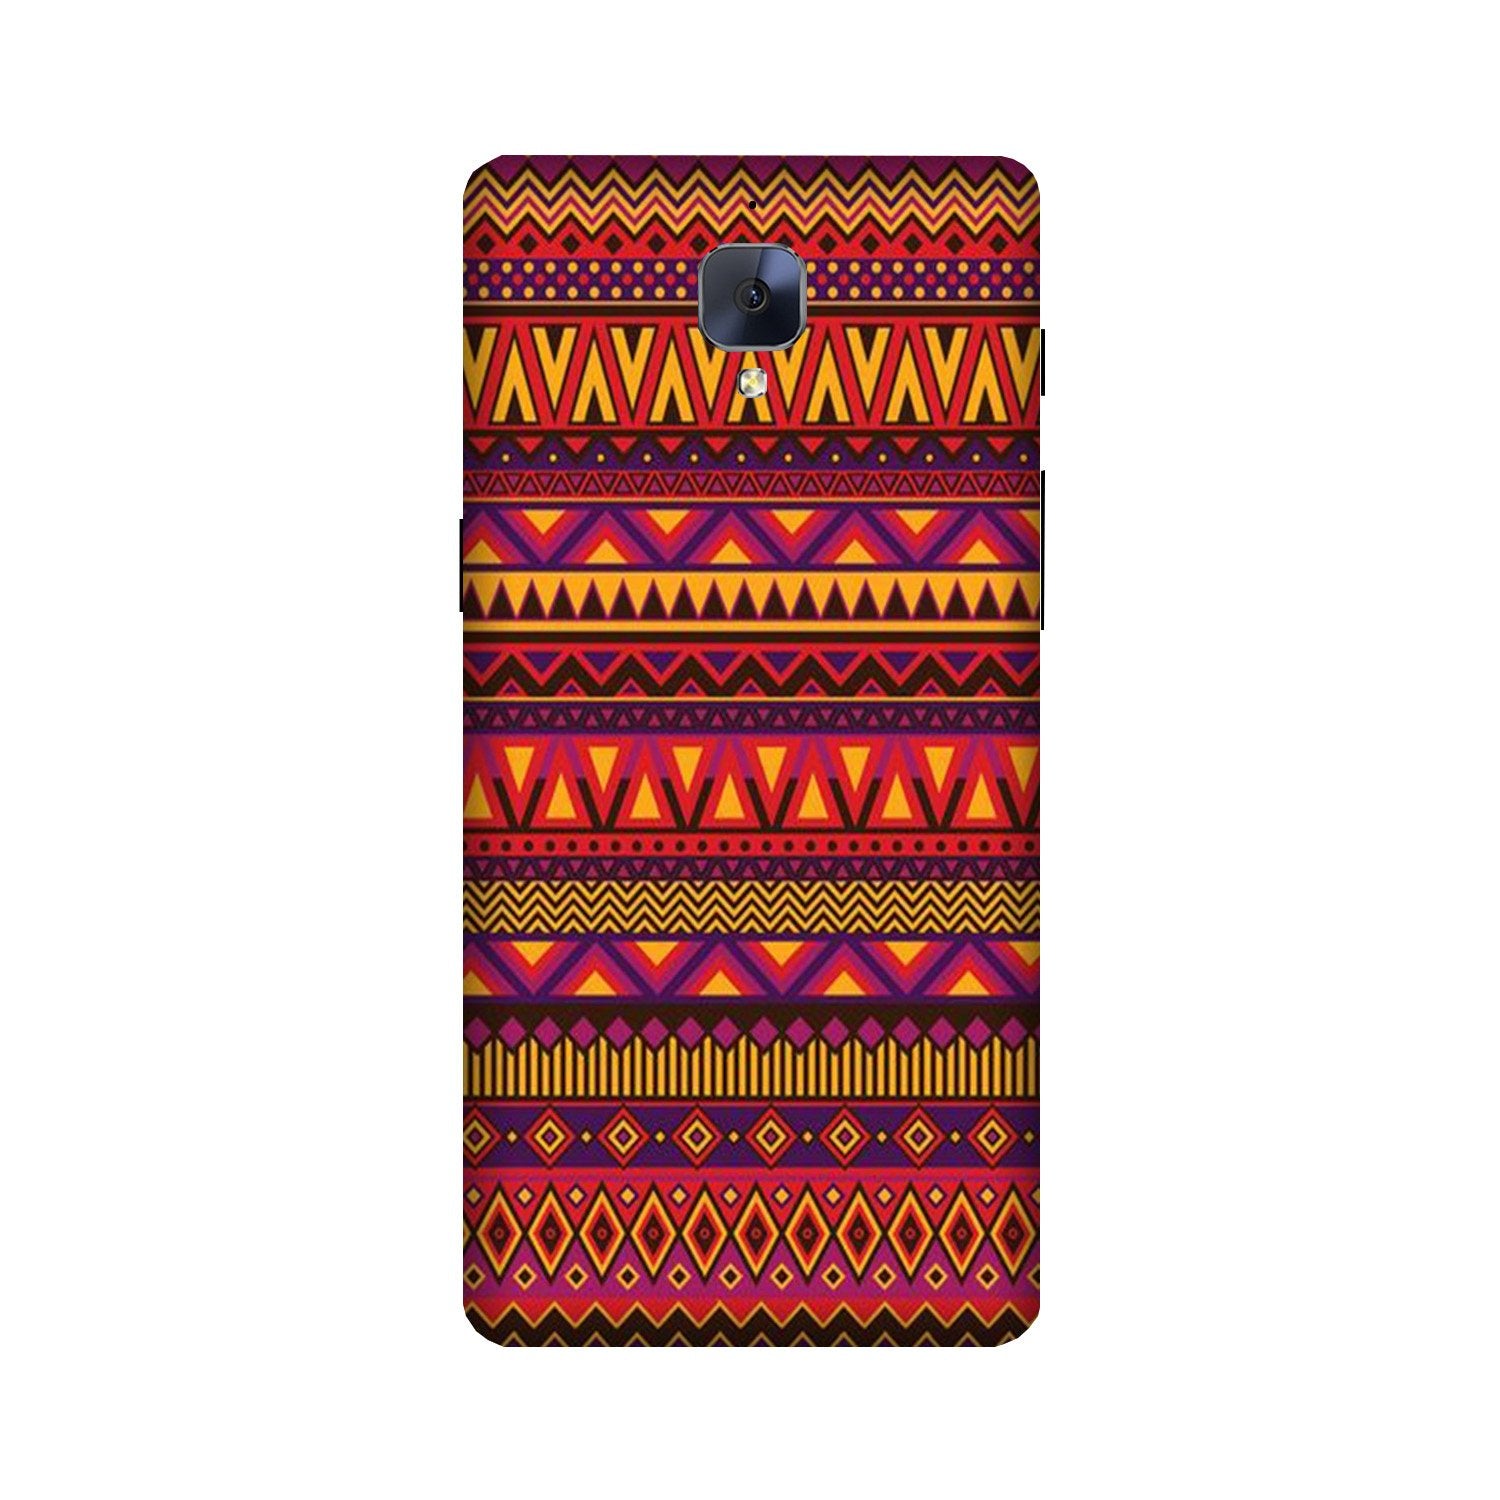 Zigzag line pattern2 Case for OnePlus 3/ 3T